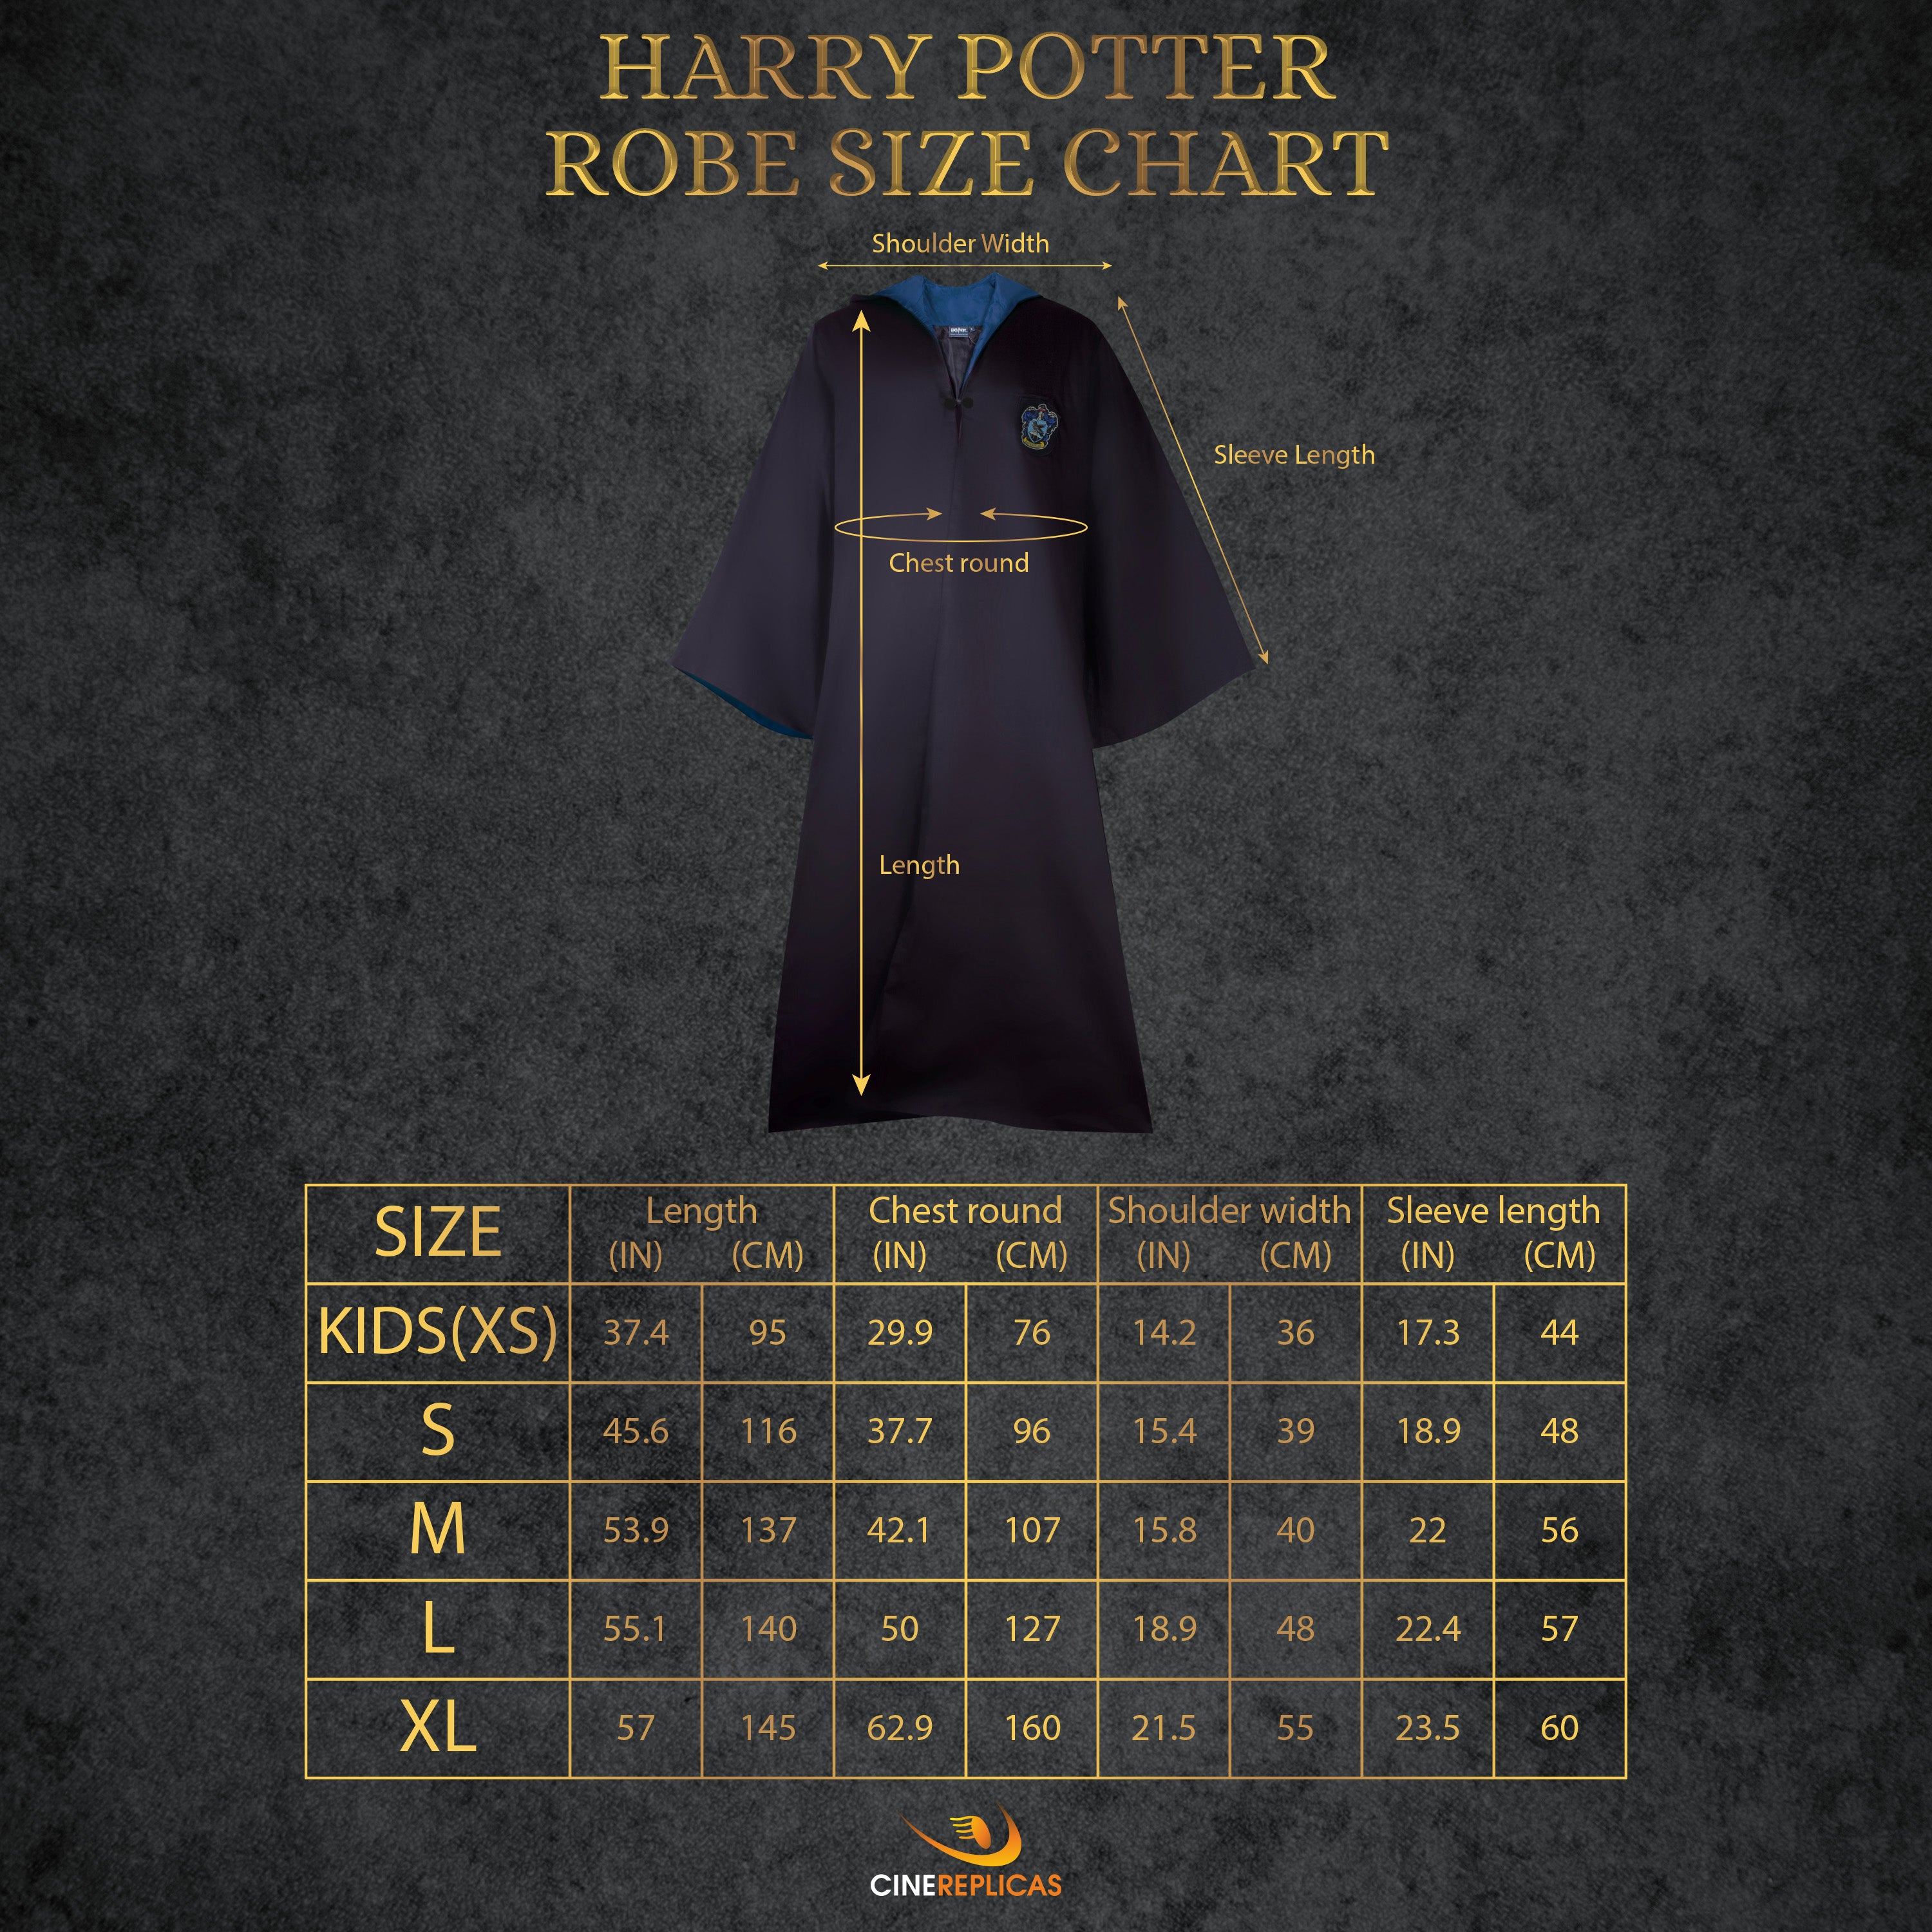 My 1:12 scale Phicen/TBLeague seamless action figure gets new clothing,  including a Hogwarts robe. Ravenclaw, of course!